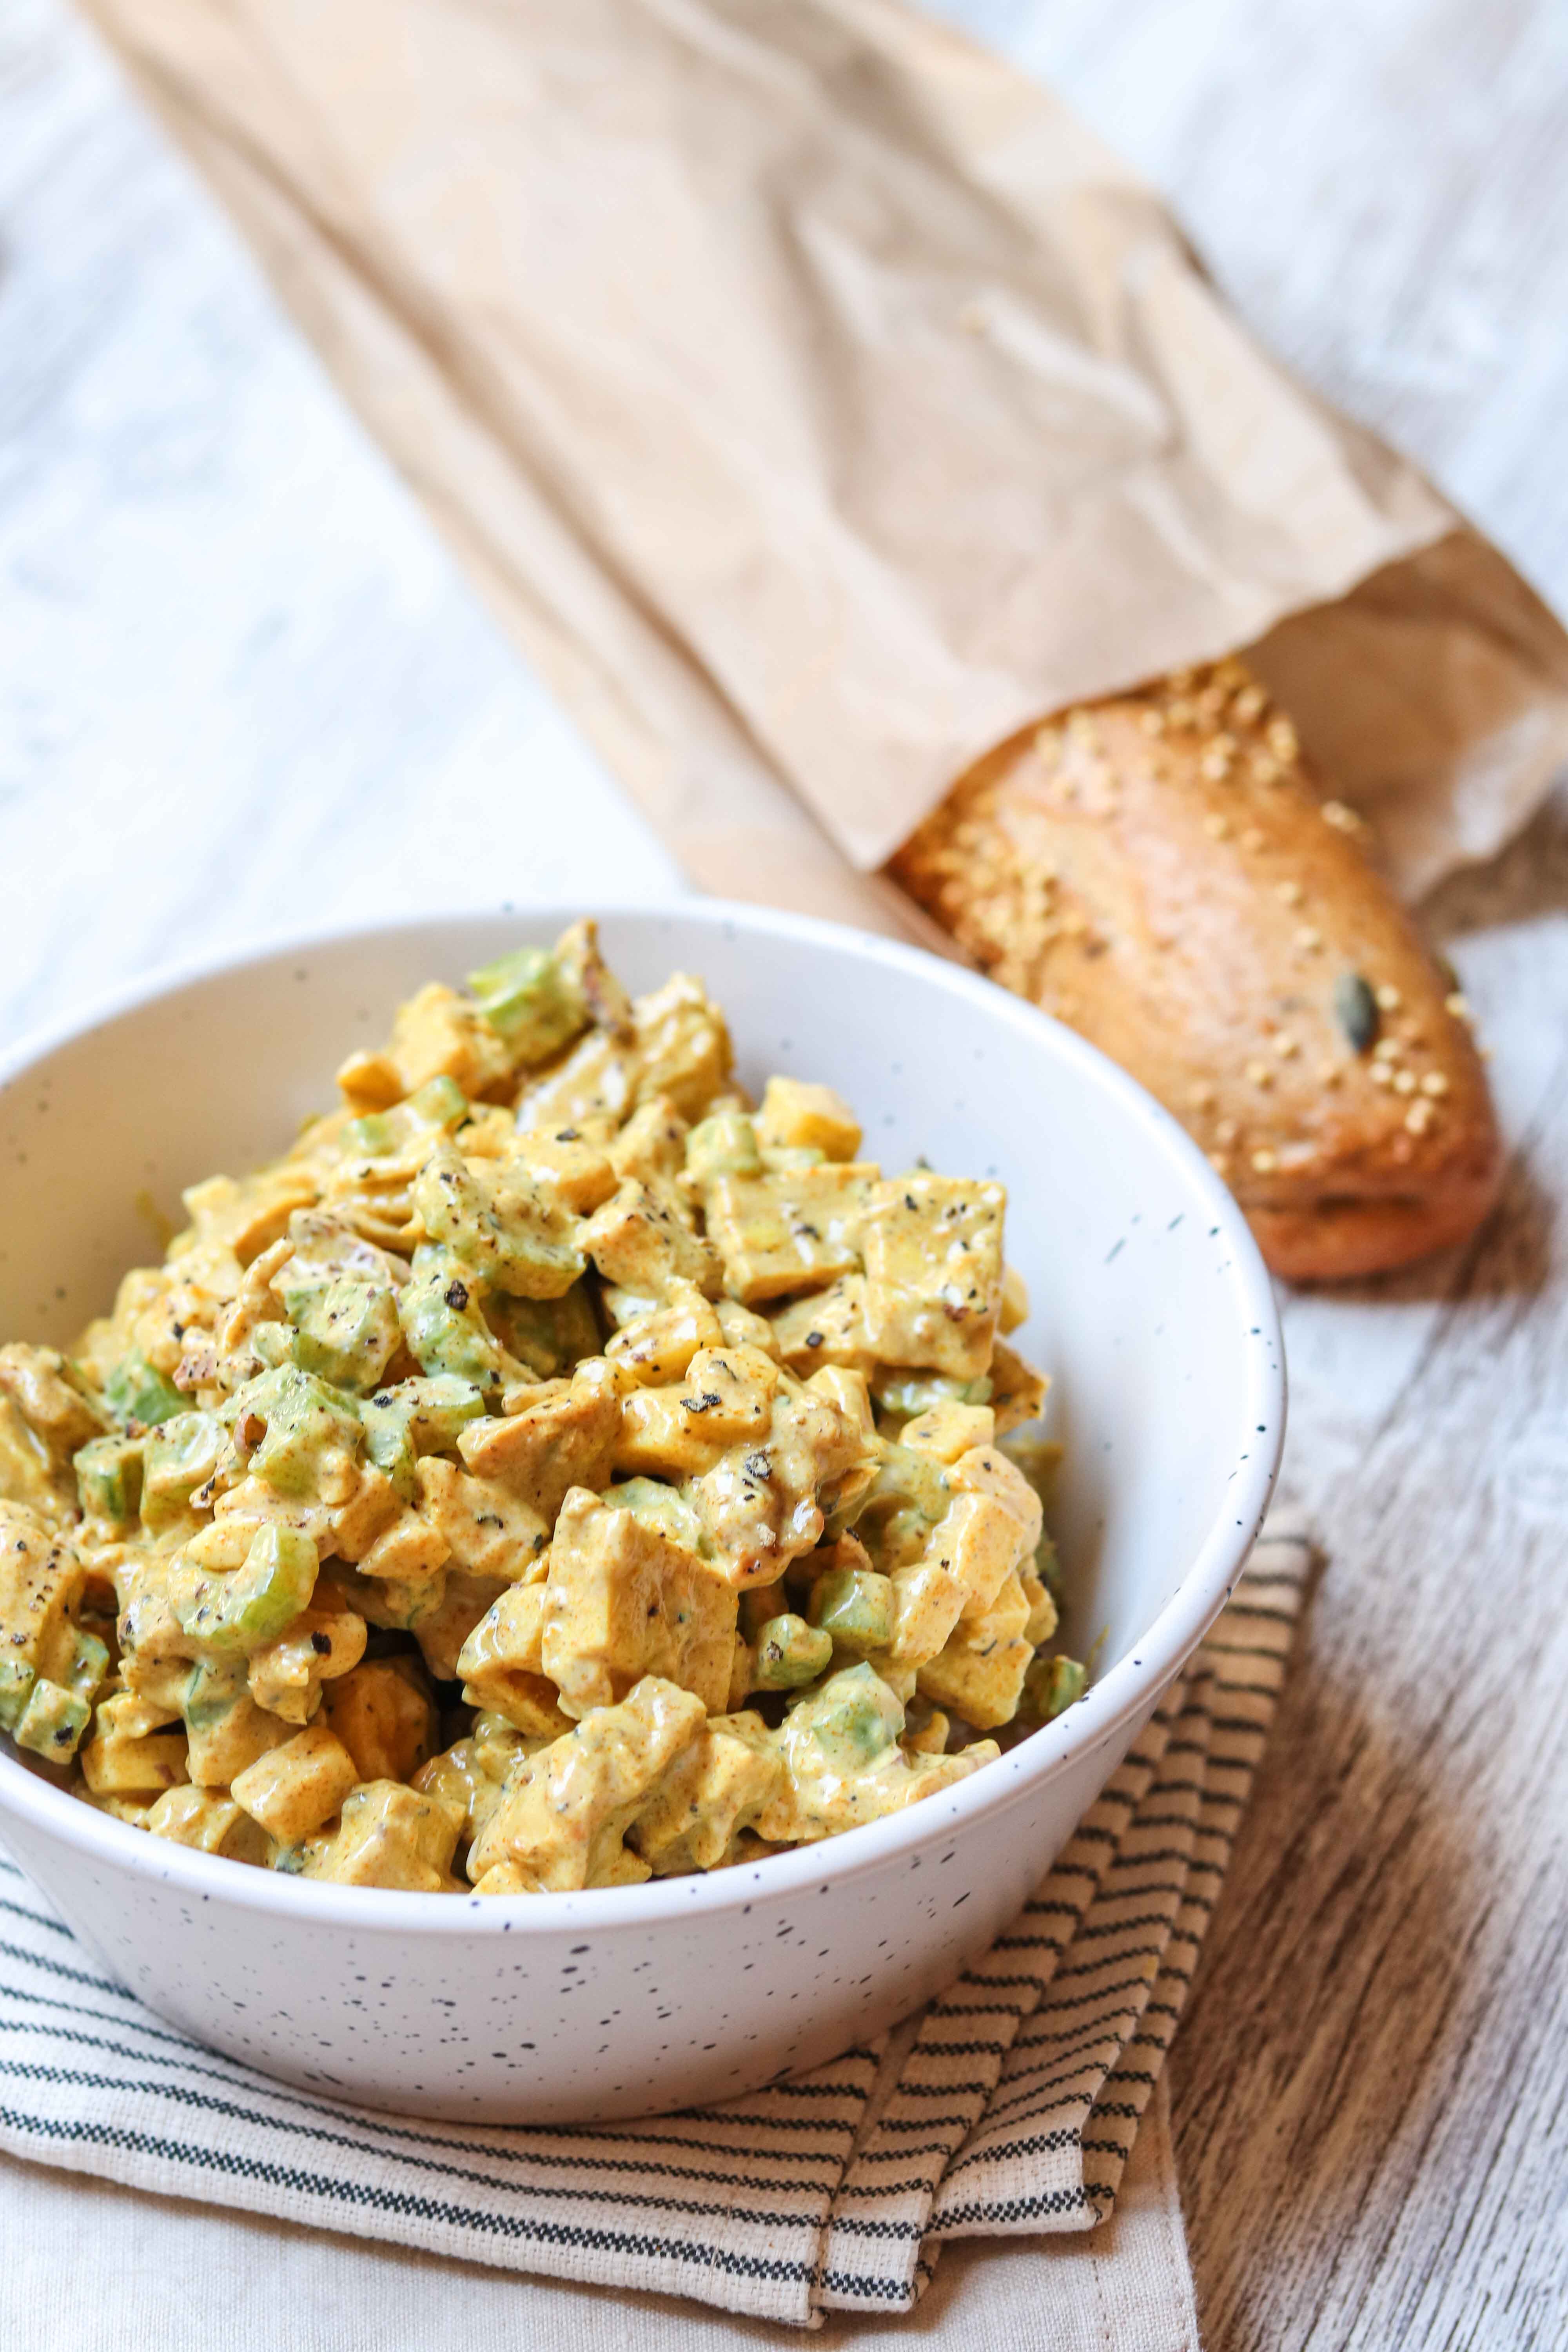 Healthy coronation chicken salad, a healthy version of on old classic. Serve on it's own or with a crusty role.